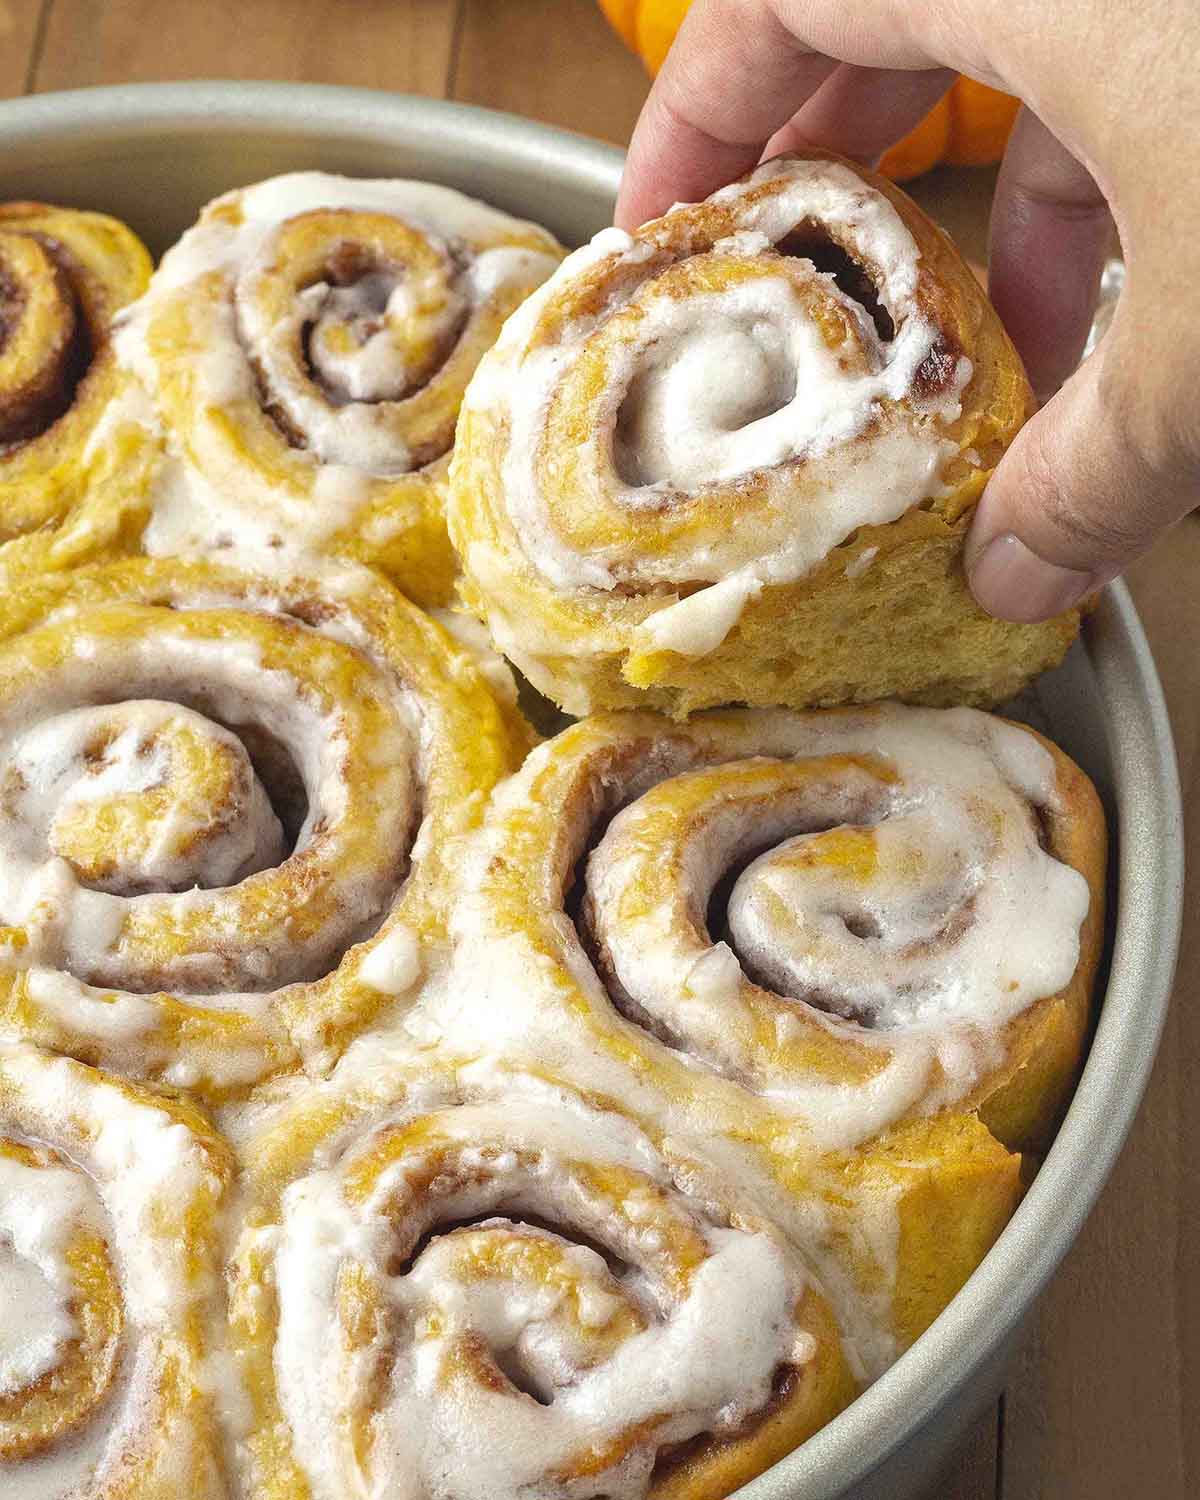 A hand taking a freshly baked pumpkin cinnamon roll out of the pan.